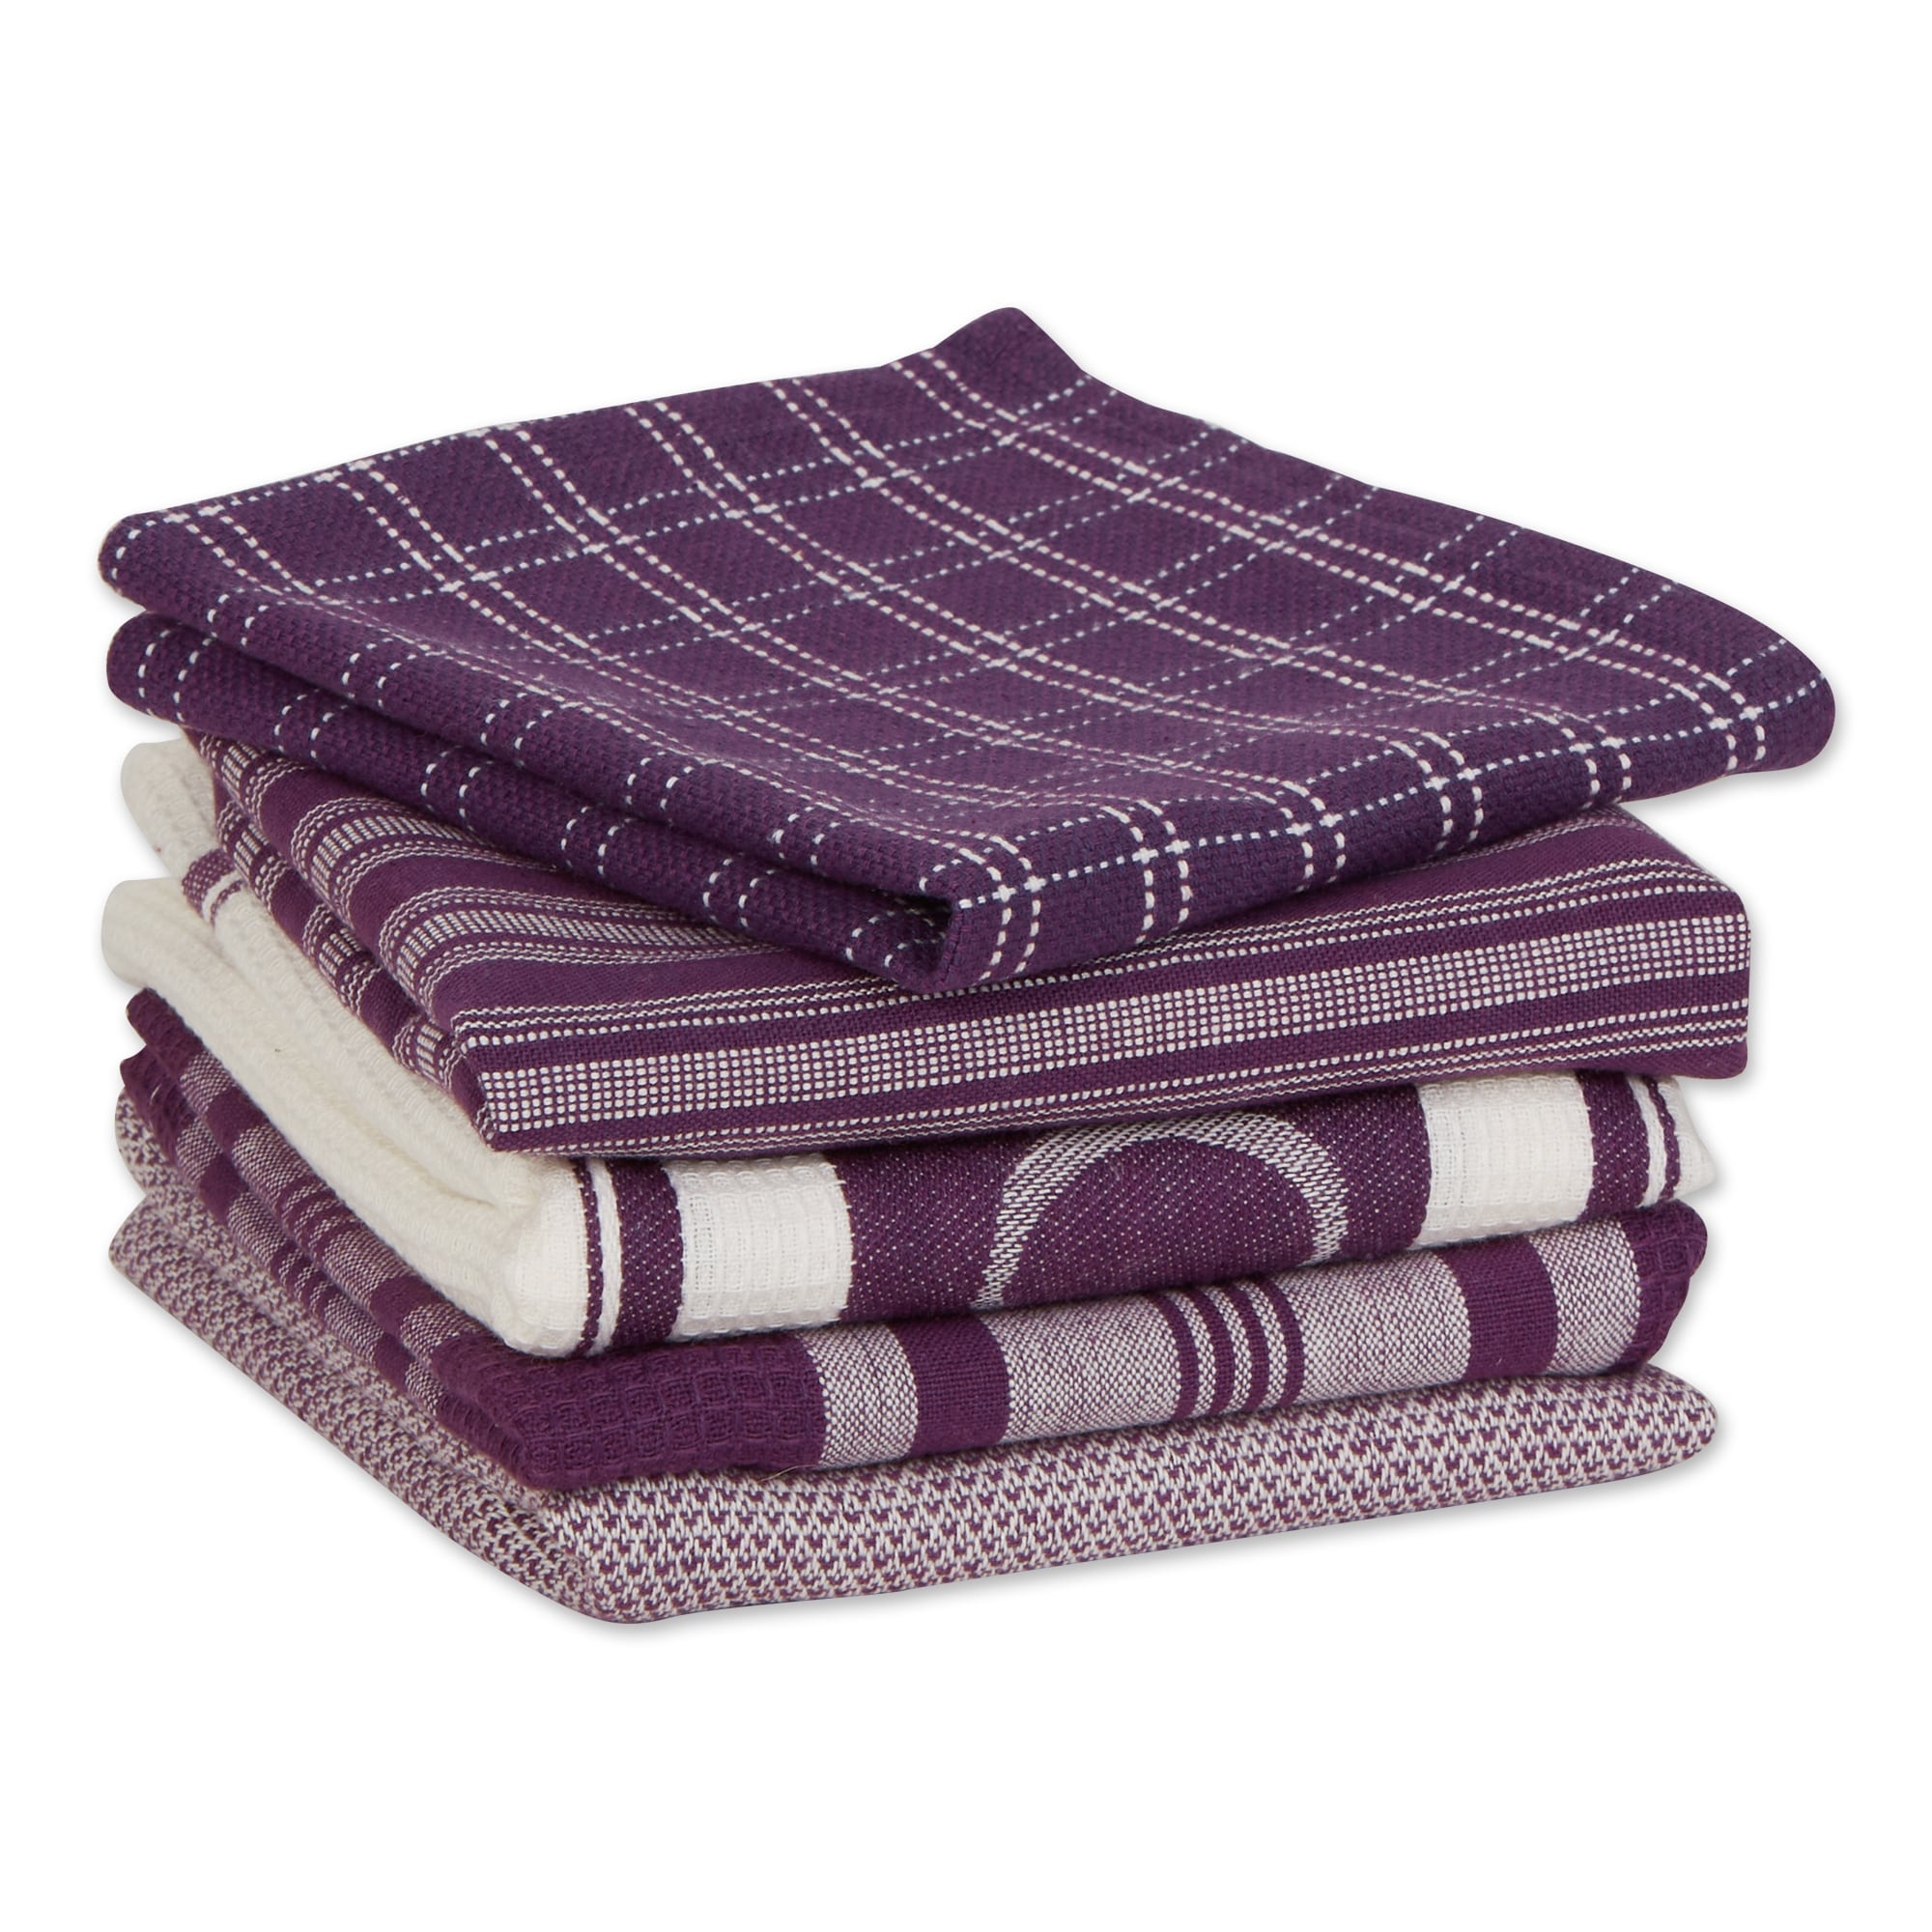 https://ak1.ostkcdn.com/images/products/is/images/direct/22ab978ffac9841326e41bc567f7dacf59e876bd/DII-Foodie-Dishtowel-And-Dishcloth-5-Piece.jpg